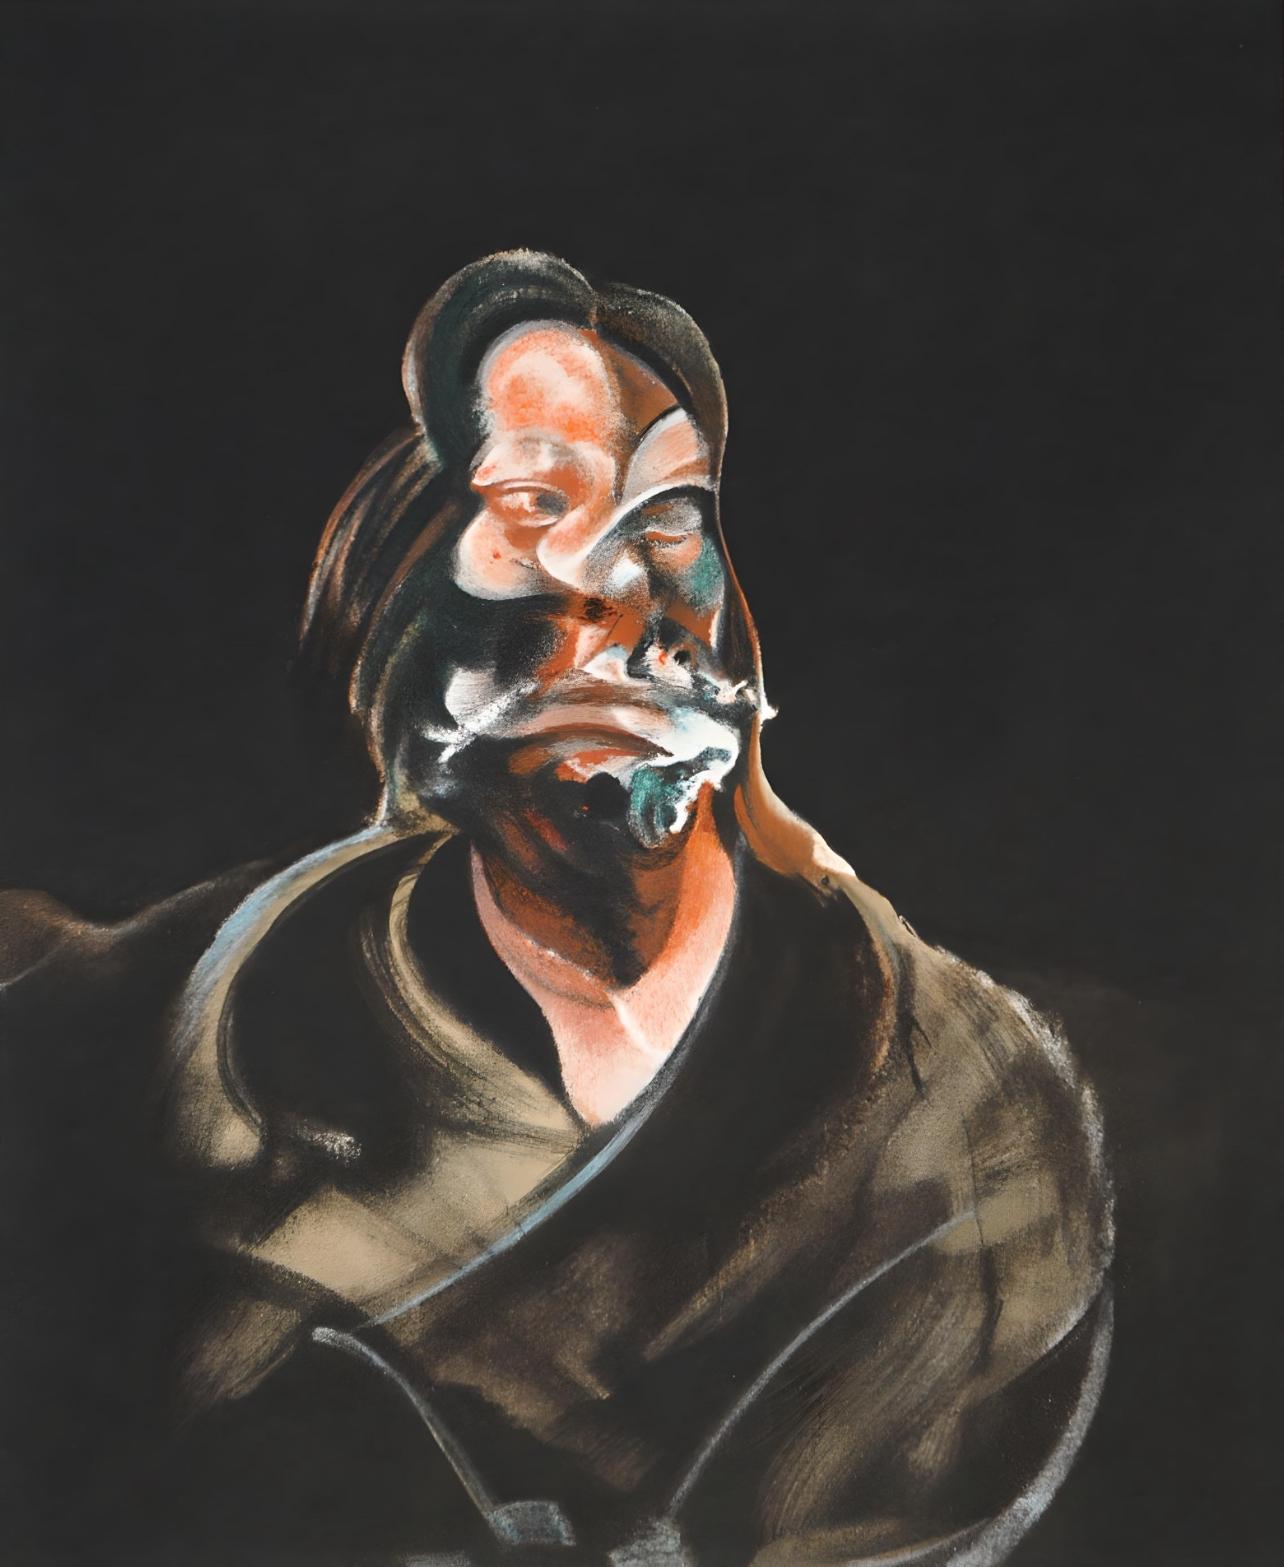 Francis Bacon Abstract Print - Bacon, Portrait of Isabel Rawsthorne, Derrière le miroir (after)